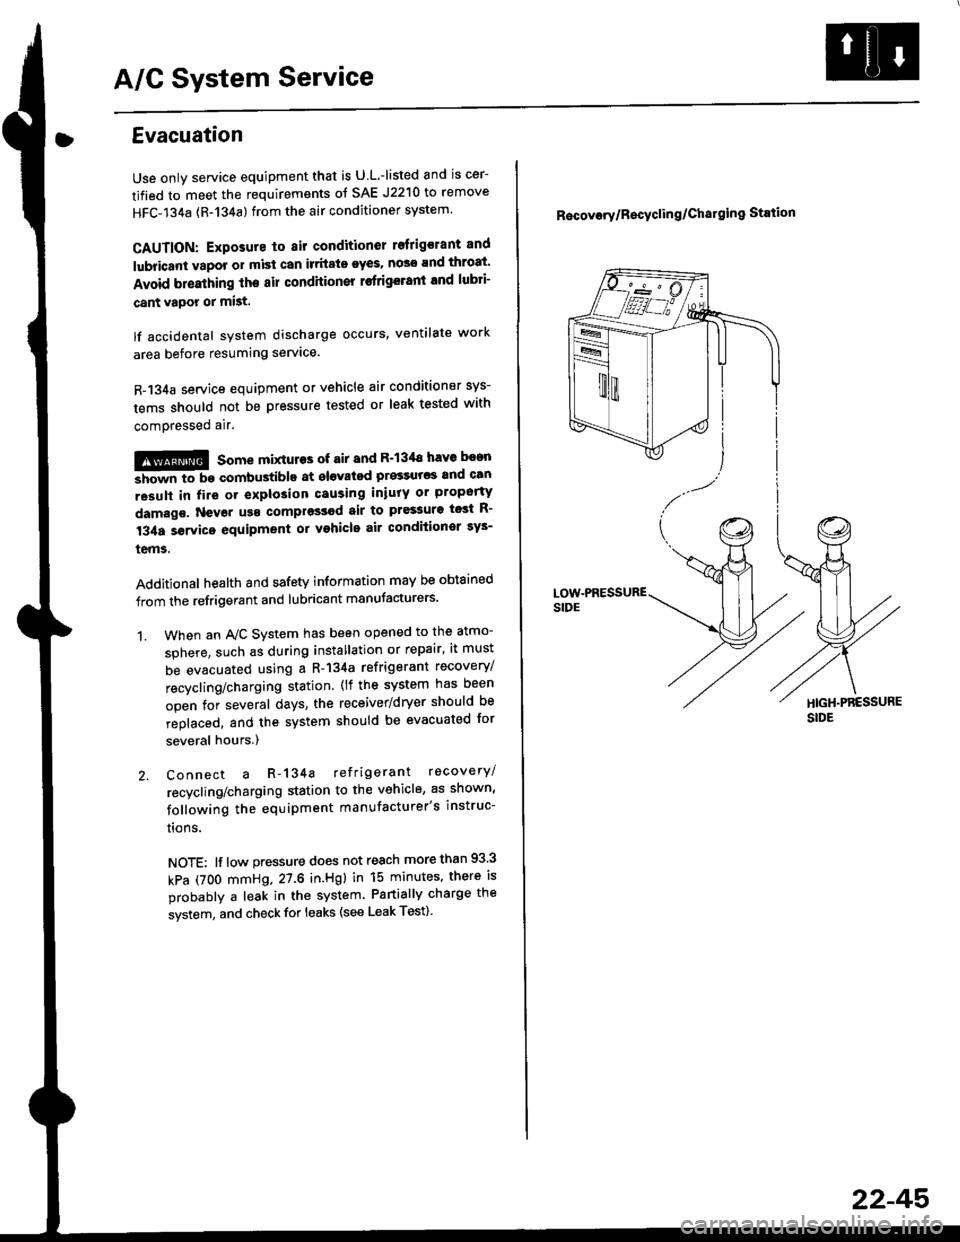 HONDA CIVIC 1999 6.G User Guide A/C System Service
Evacuation
Use only service equipment that is U L.-listed and is cer-
tified to meet the requirements oJ SAE J2210 to remove
HFC-134a (R-134a) from the air conditioner system
CAUTI